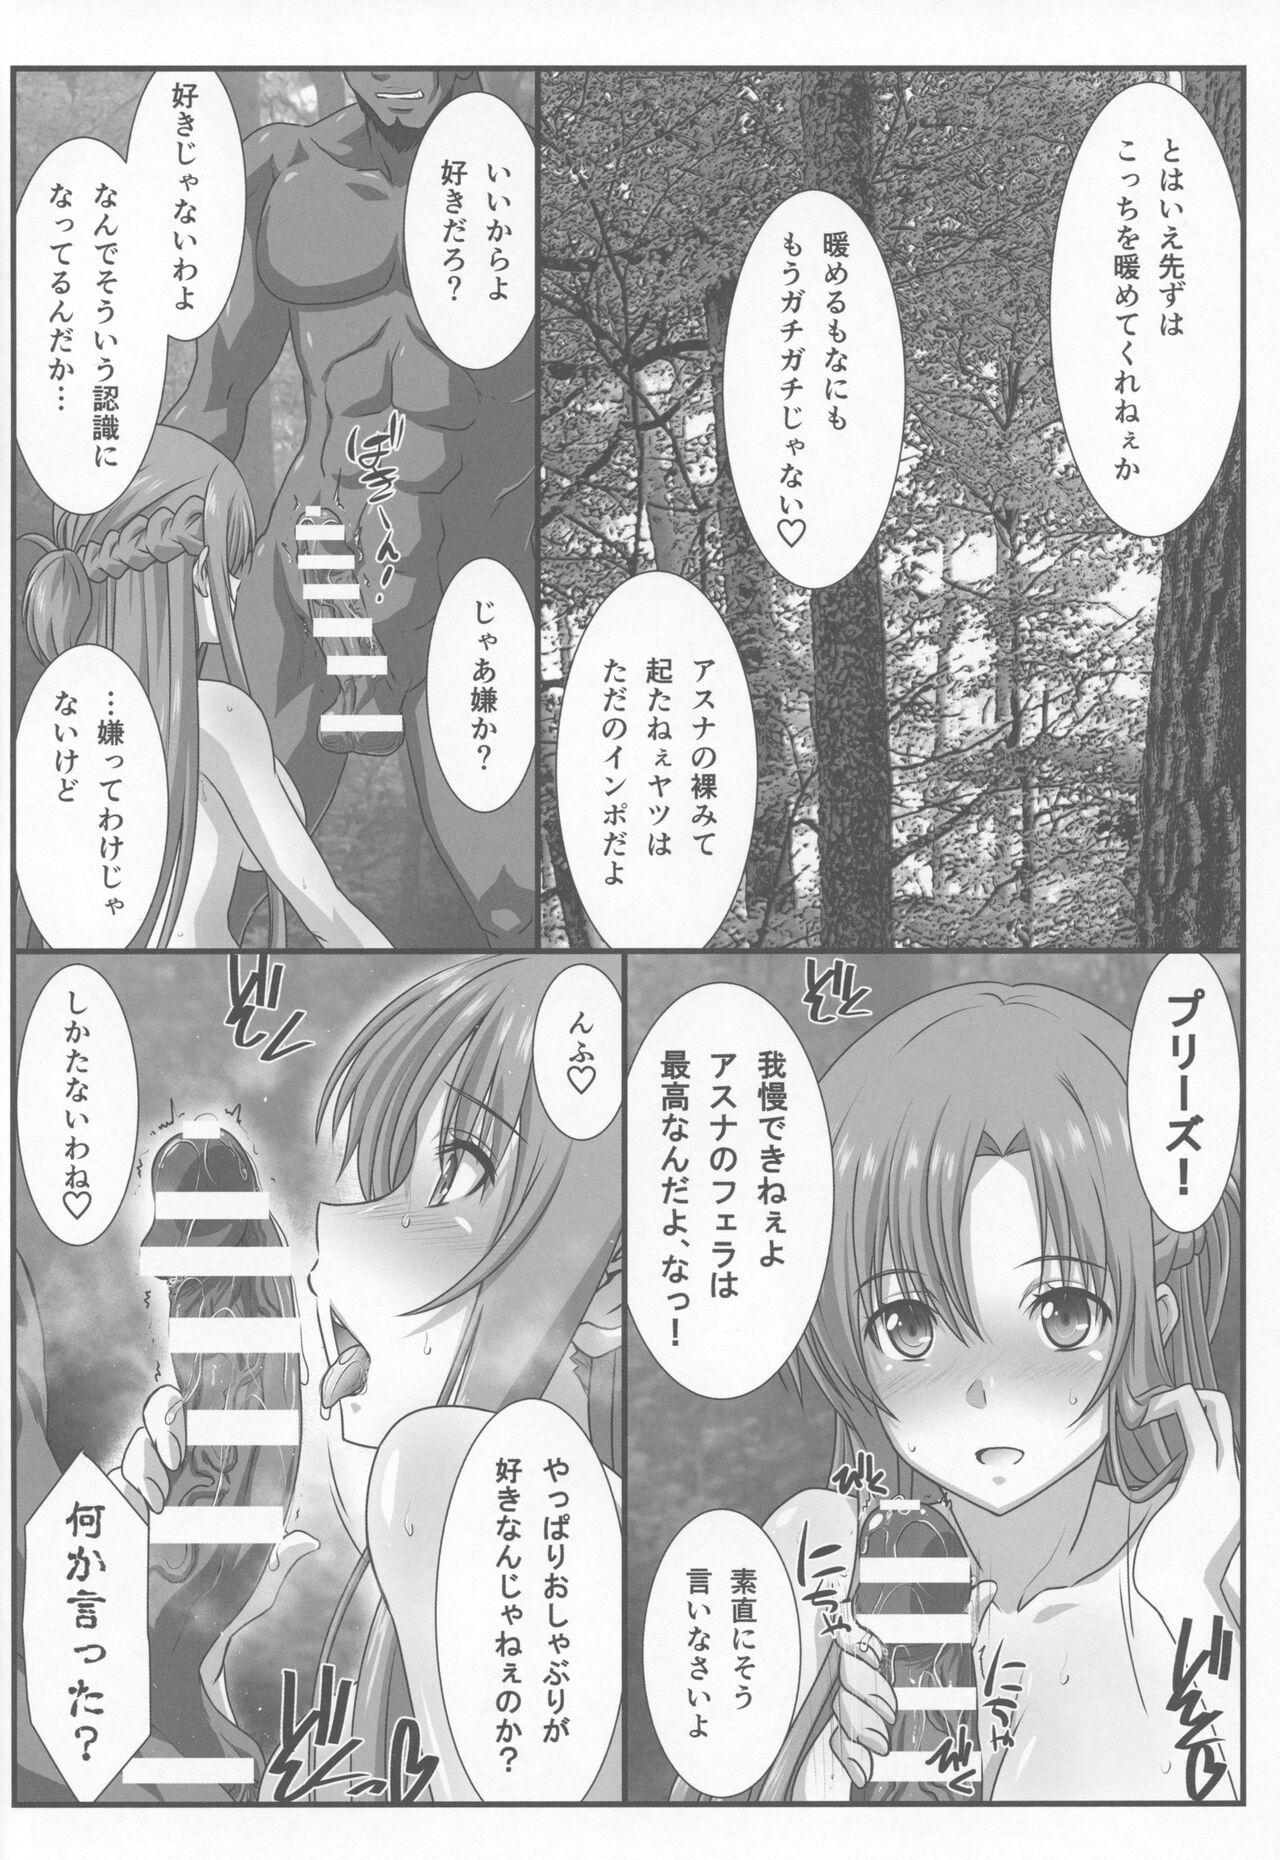 Shy Astral Bout Ver. 45 - Sword art online Blond - Page 5